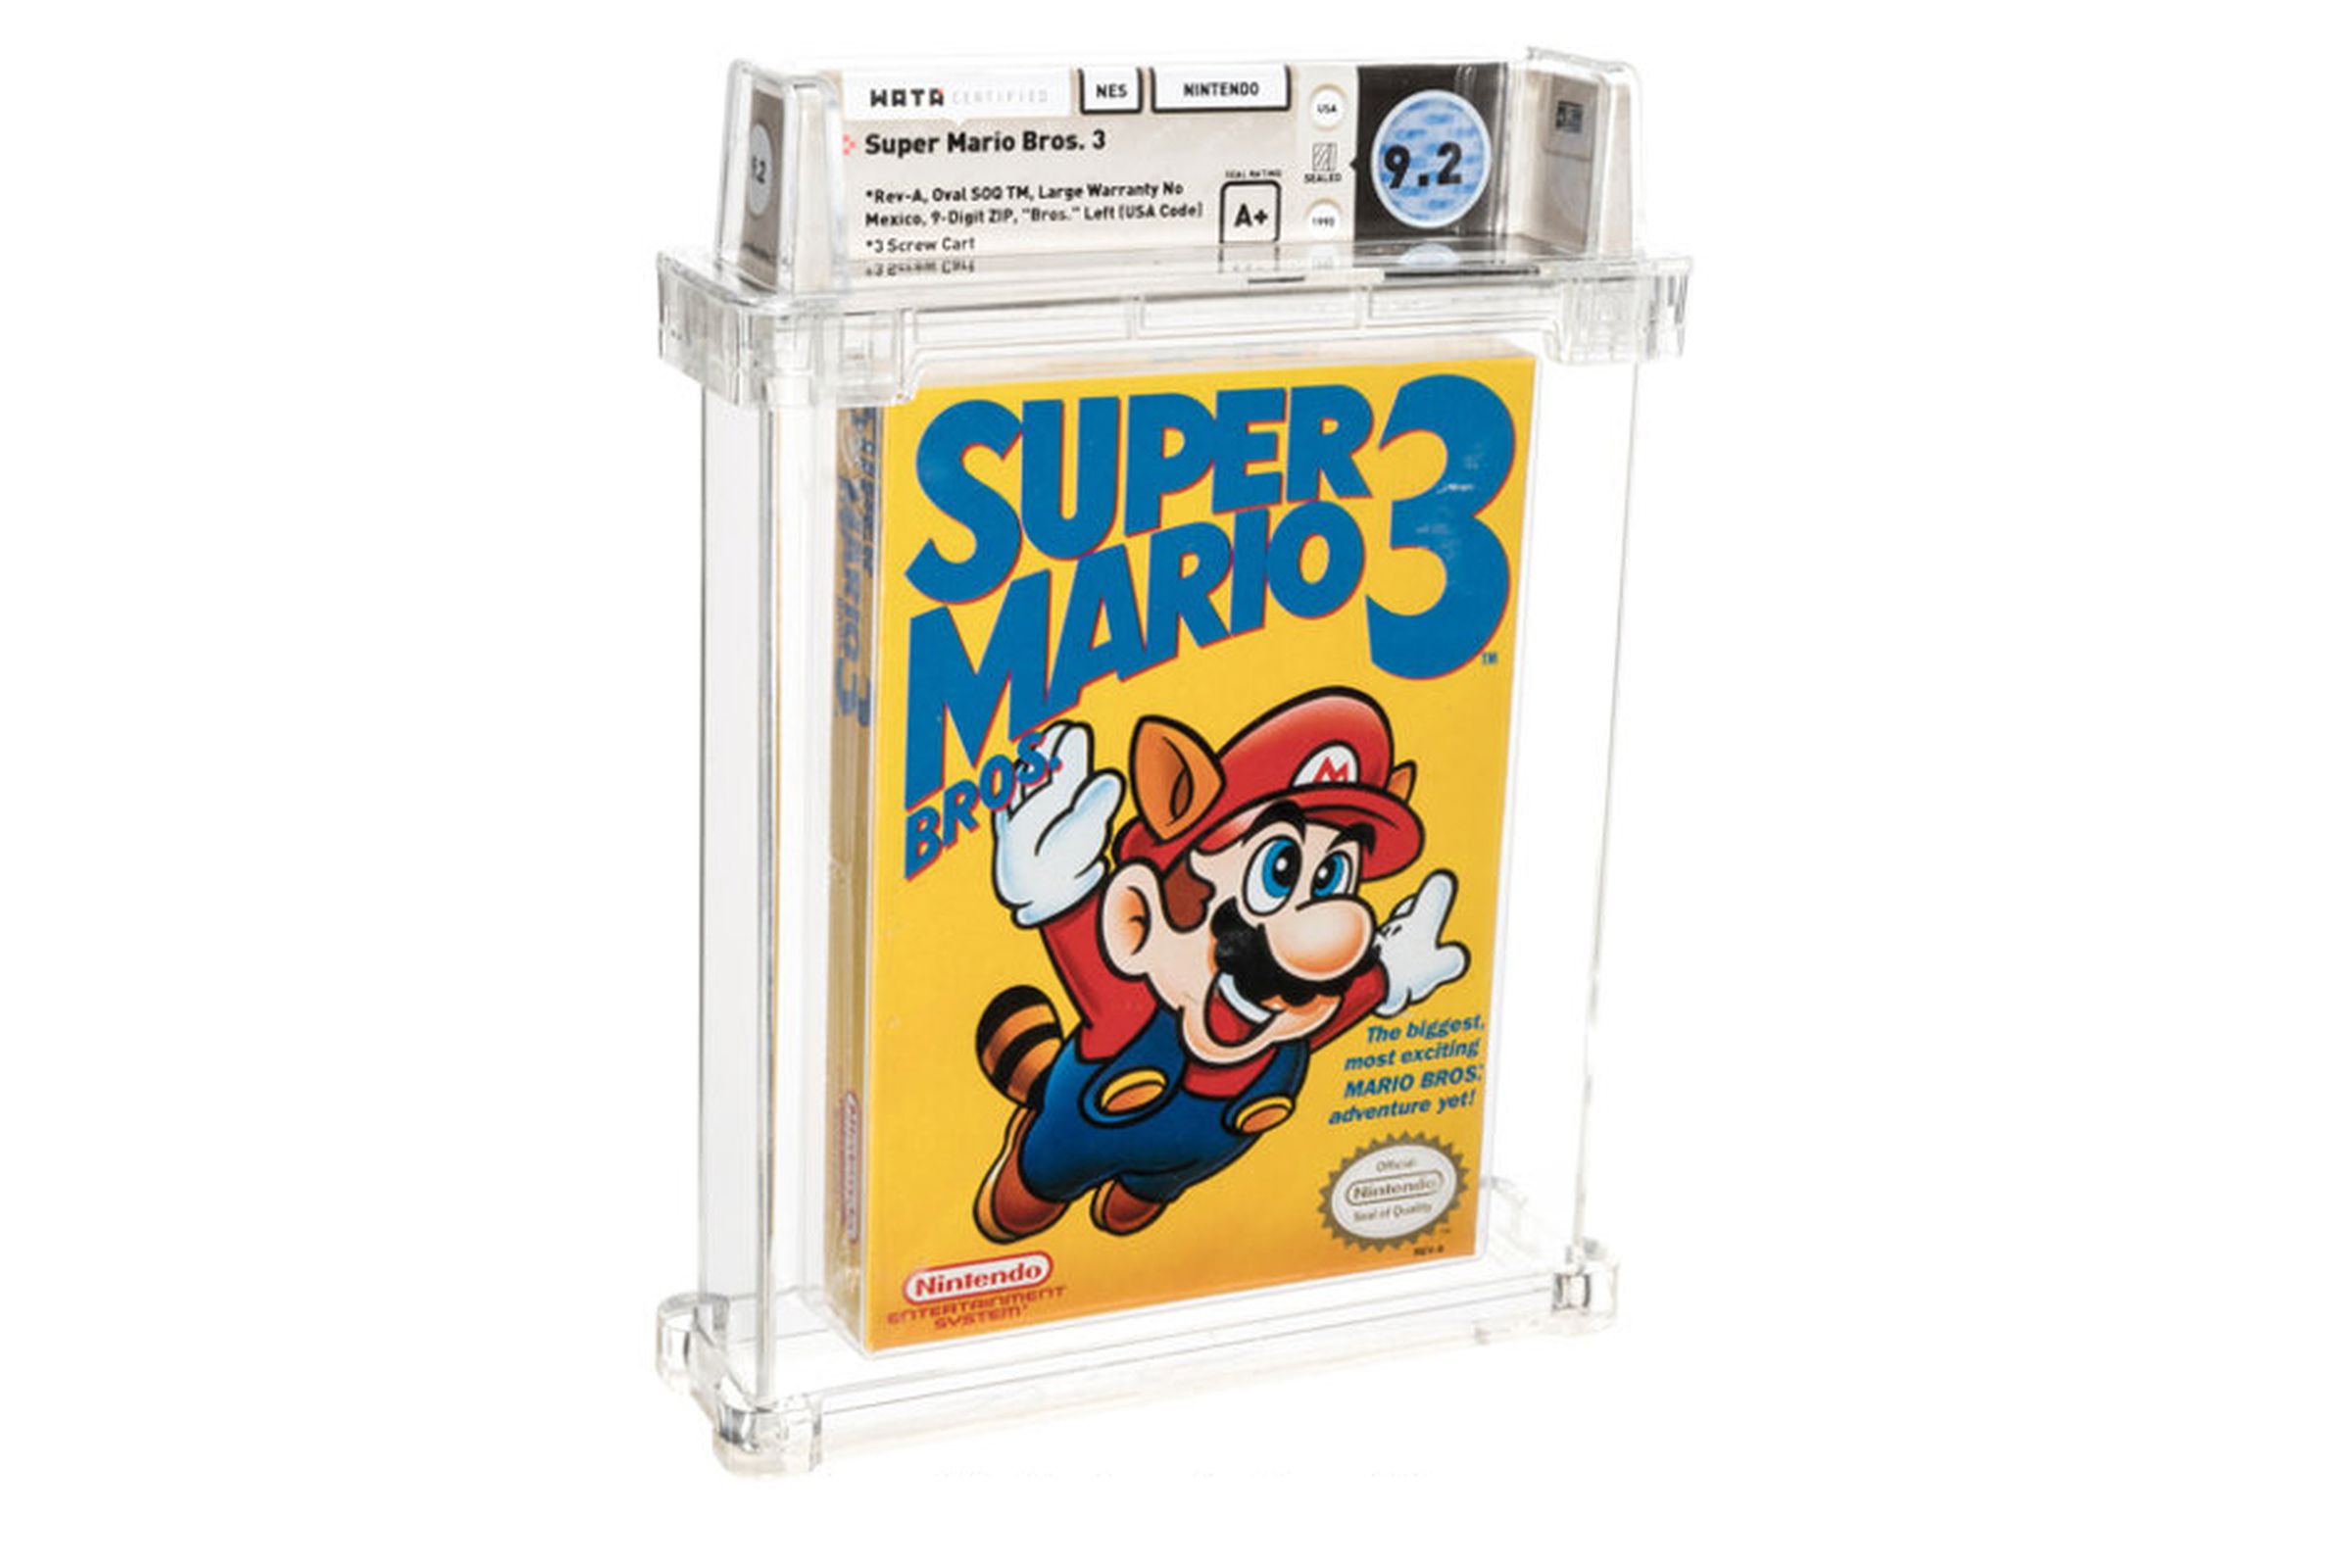 The game featured a rare box layout and was in excellent condition.